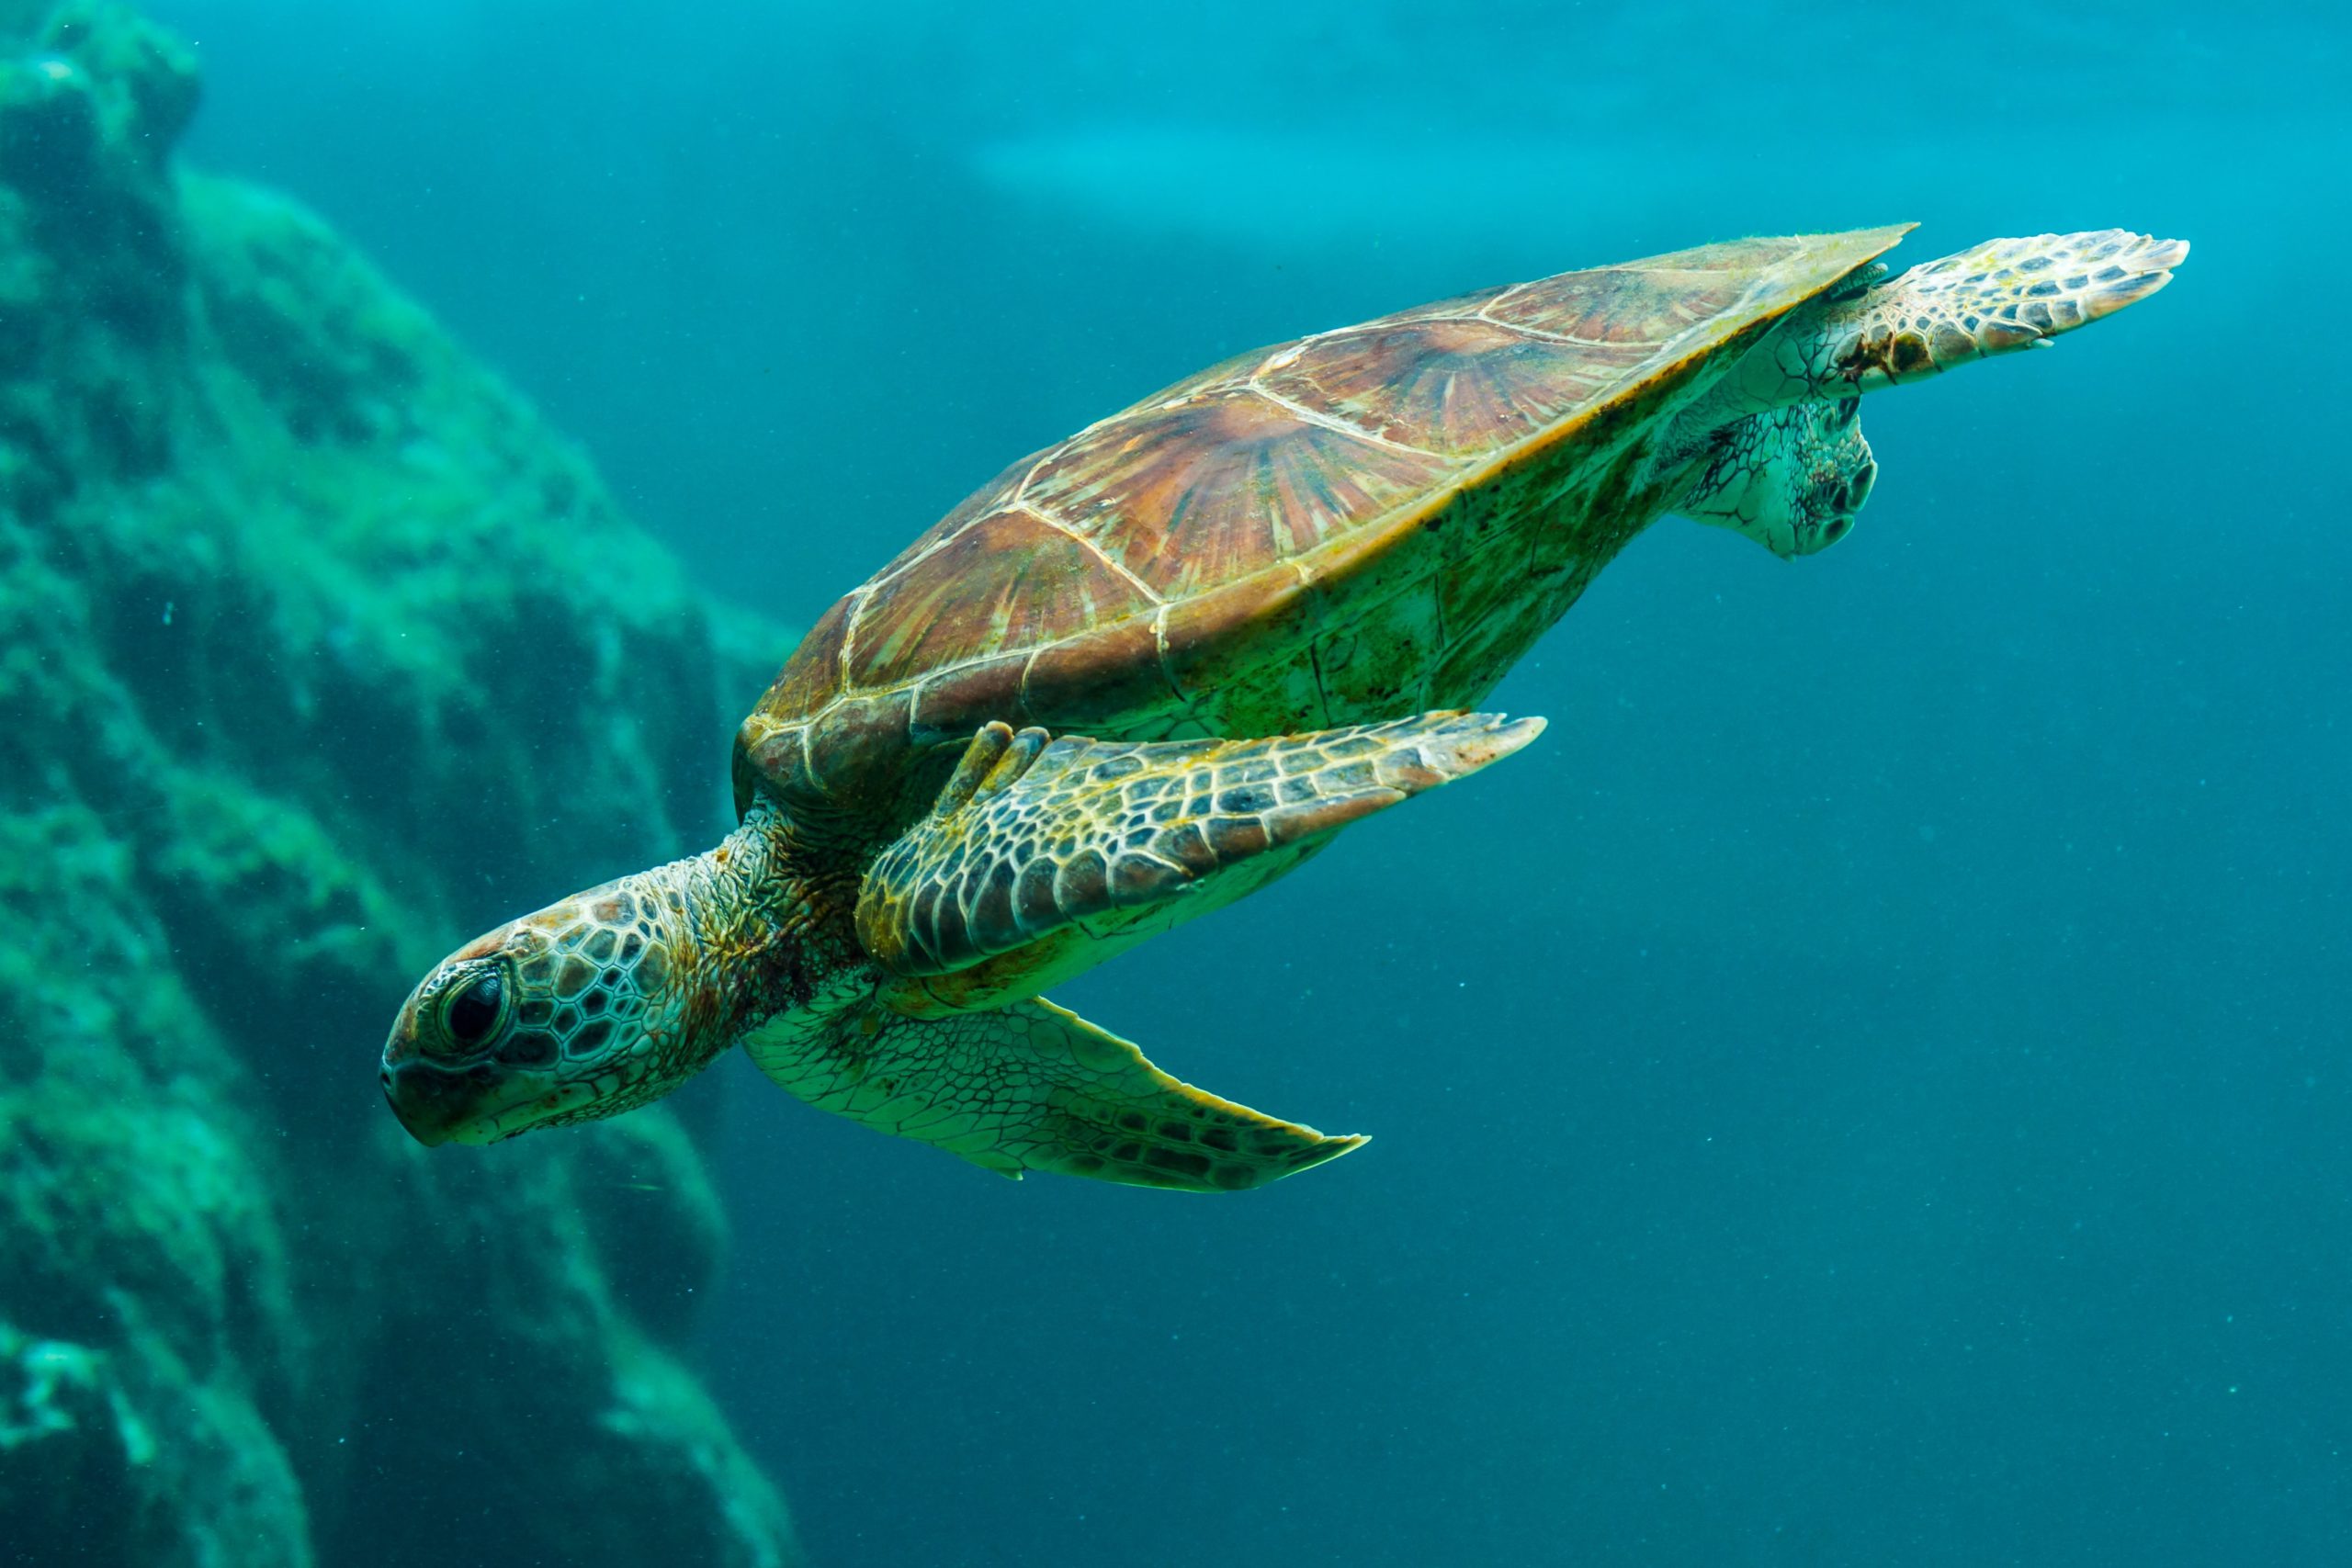 This is a picture of a turtle which we compare to a bond in this article.